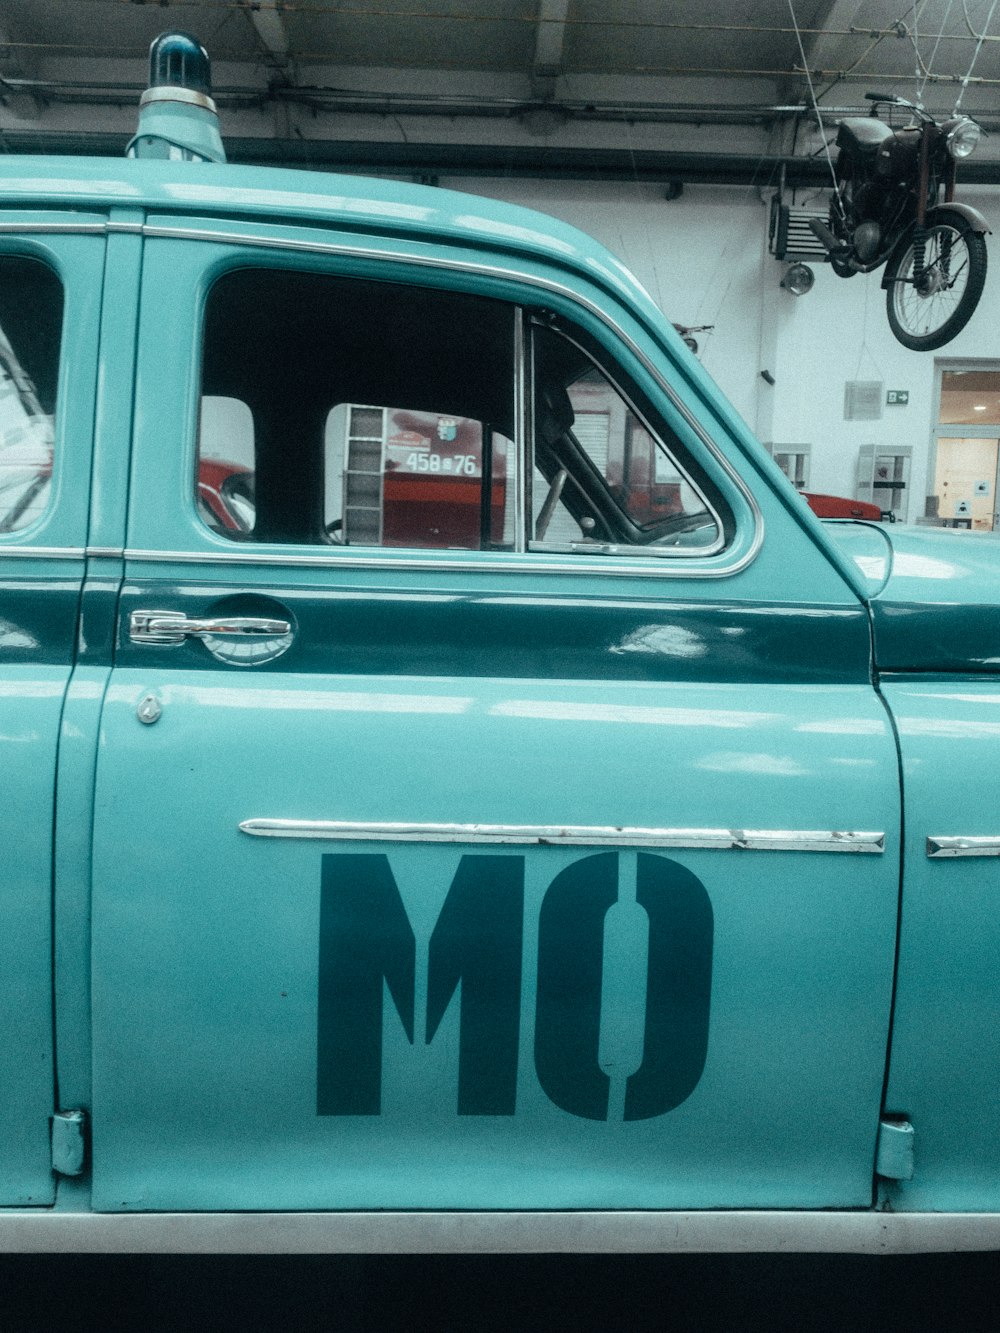 an old blue truck with the word om written on it